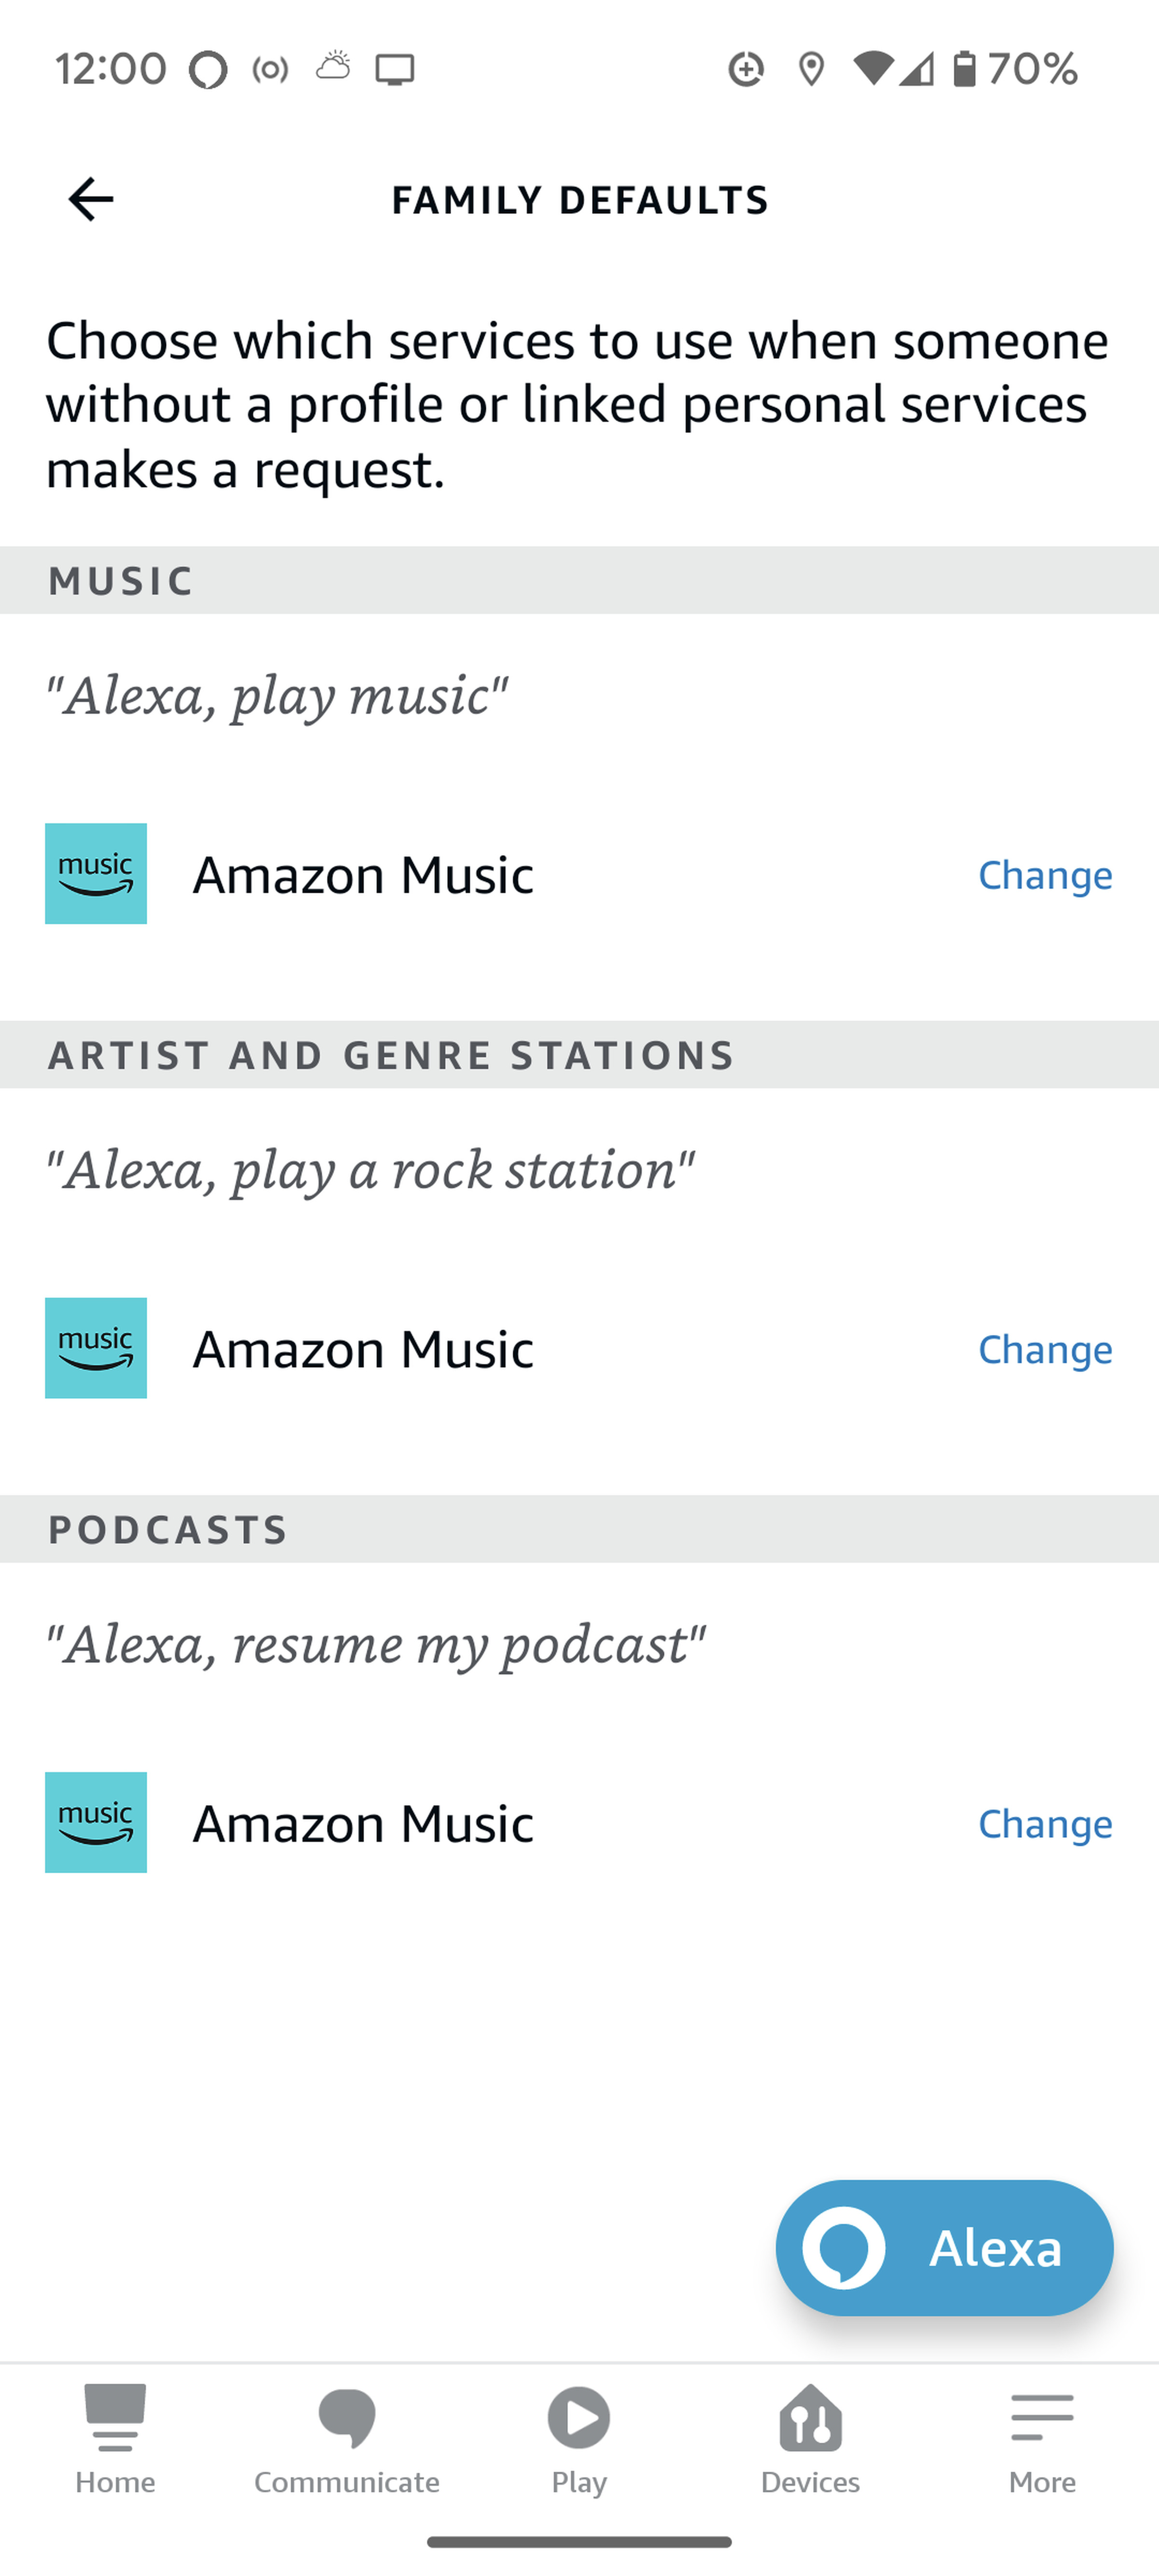 Family Defaults page with settings for Music, Artist and Genre Stations, and Podcasts.